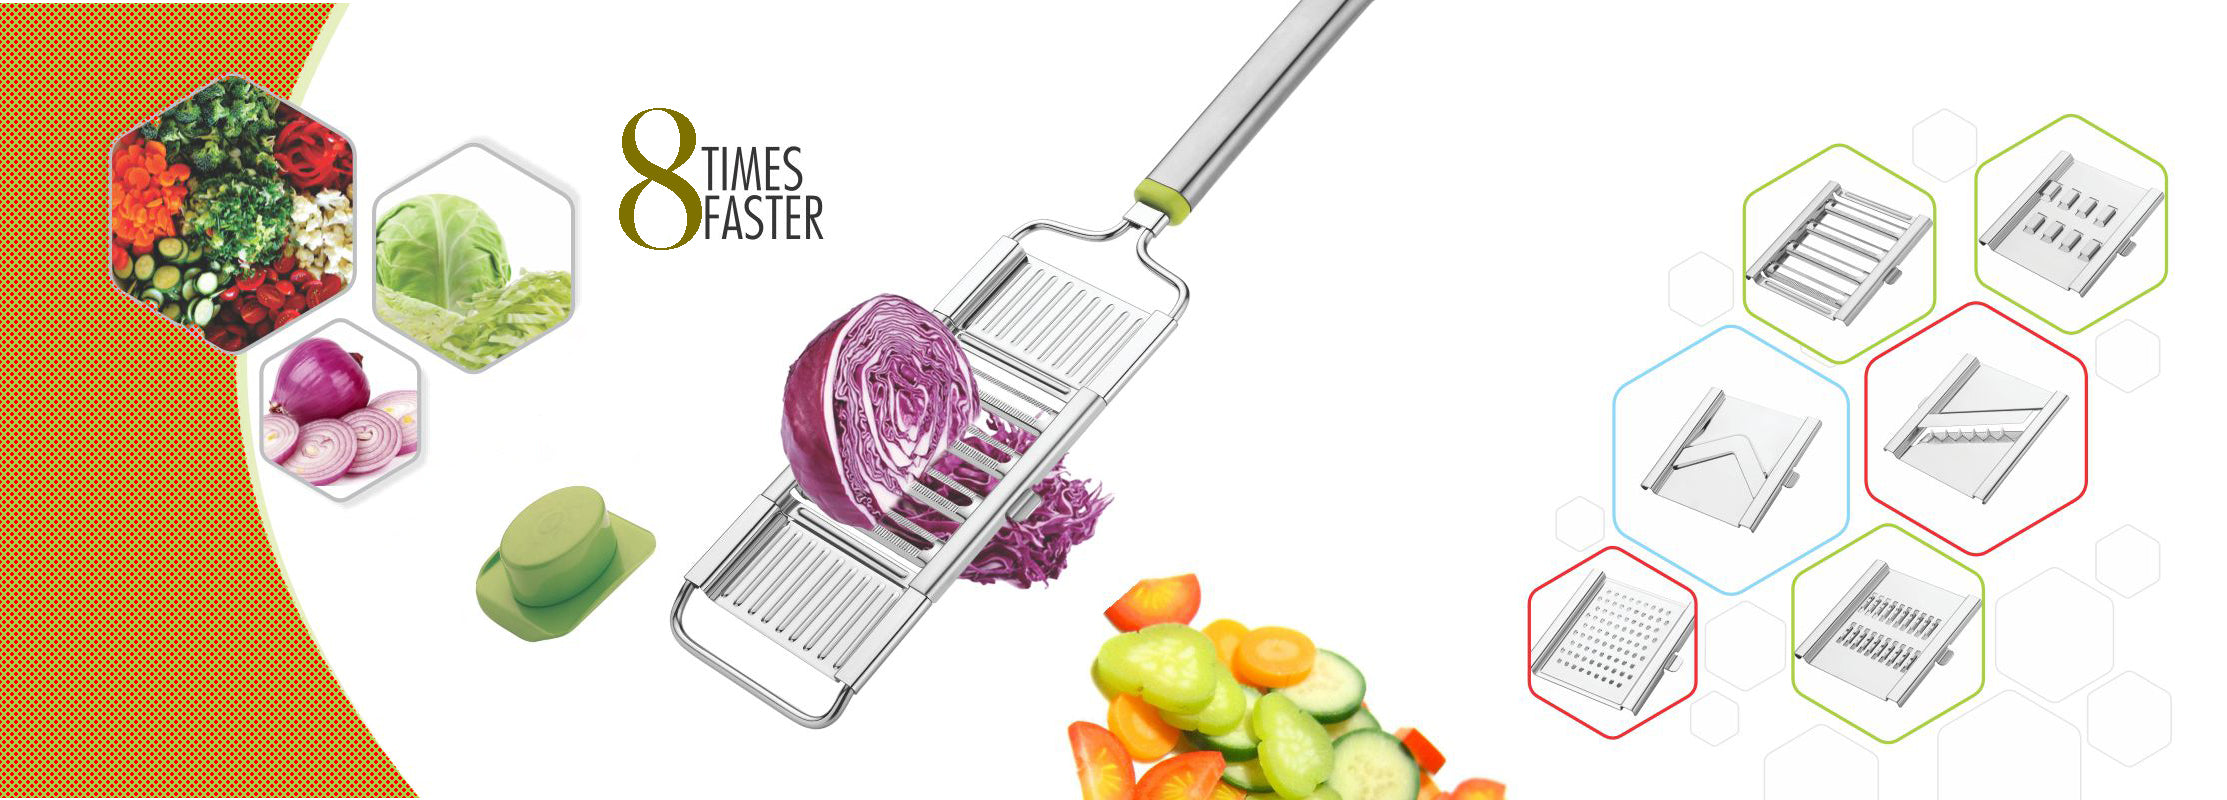 2142 6 in 1 Stainless Steel Kitchen Chips Chopper Cutter Slicer and Grater with Handle - India, 0.56 kgs